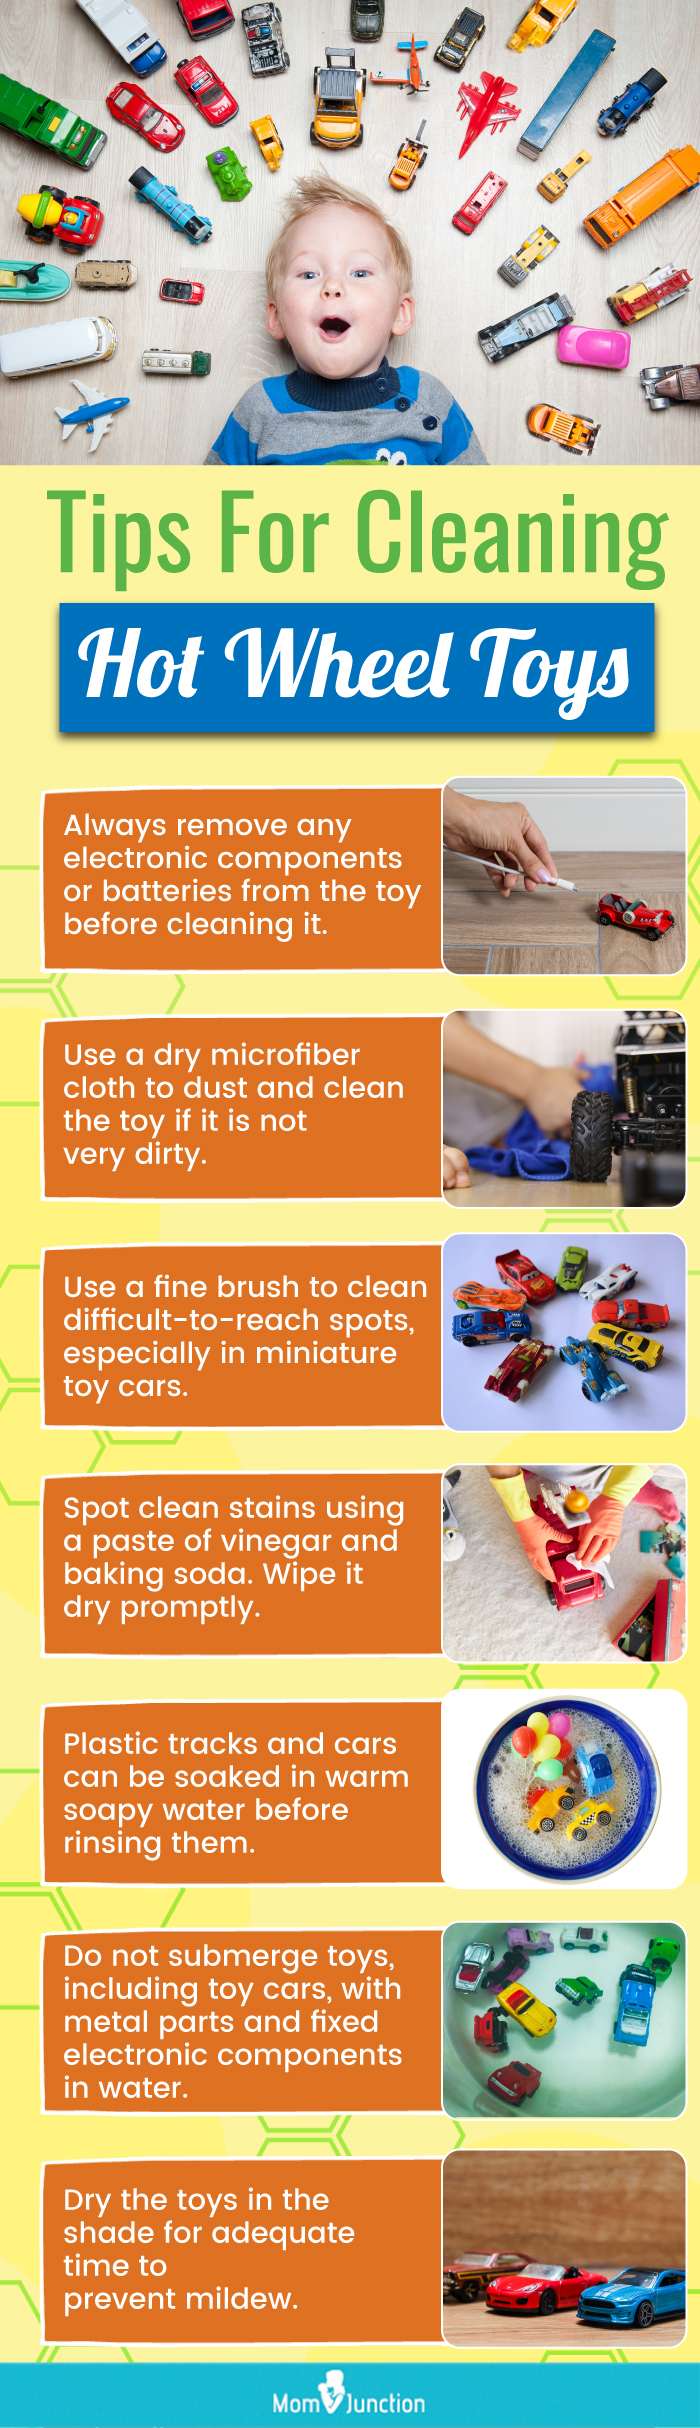 Tips For Cleaning Hot Wheel Toys (infographic)